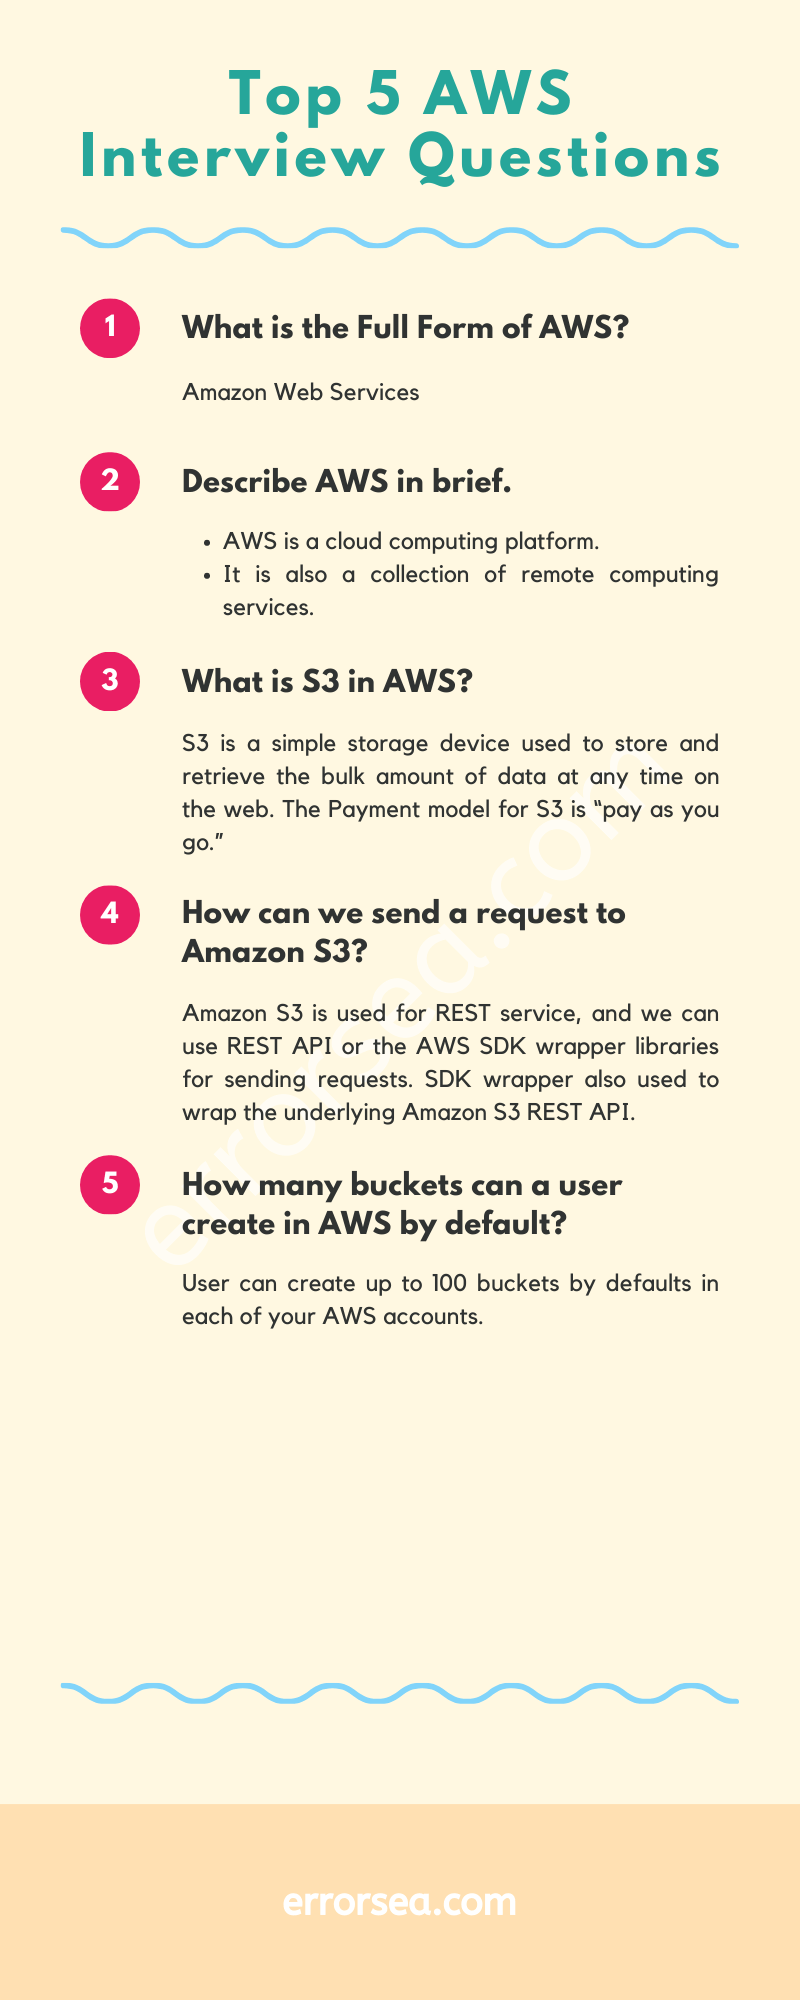 TOP 5 AWS Interview Questions and answers